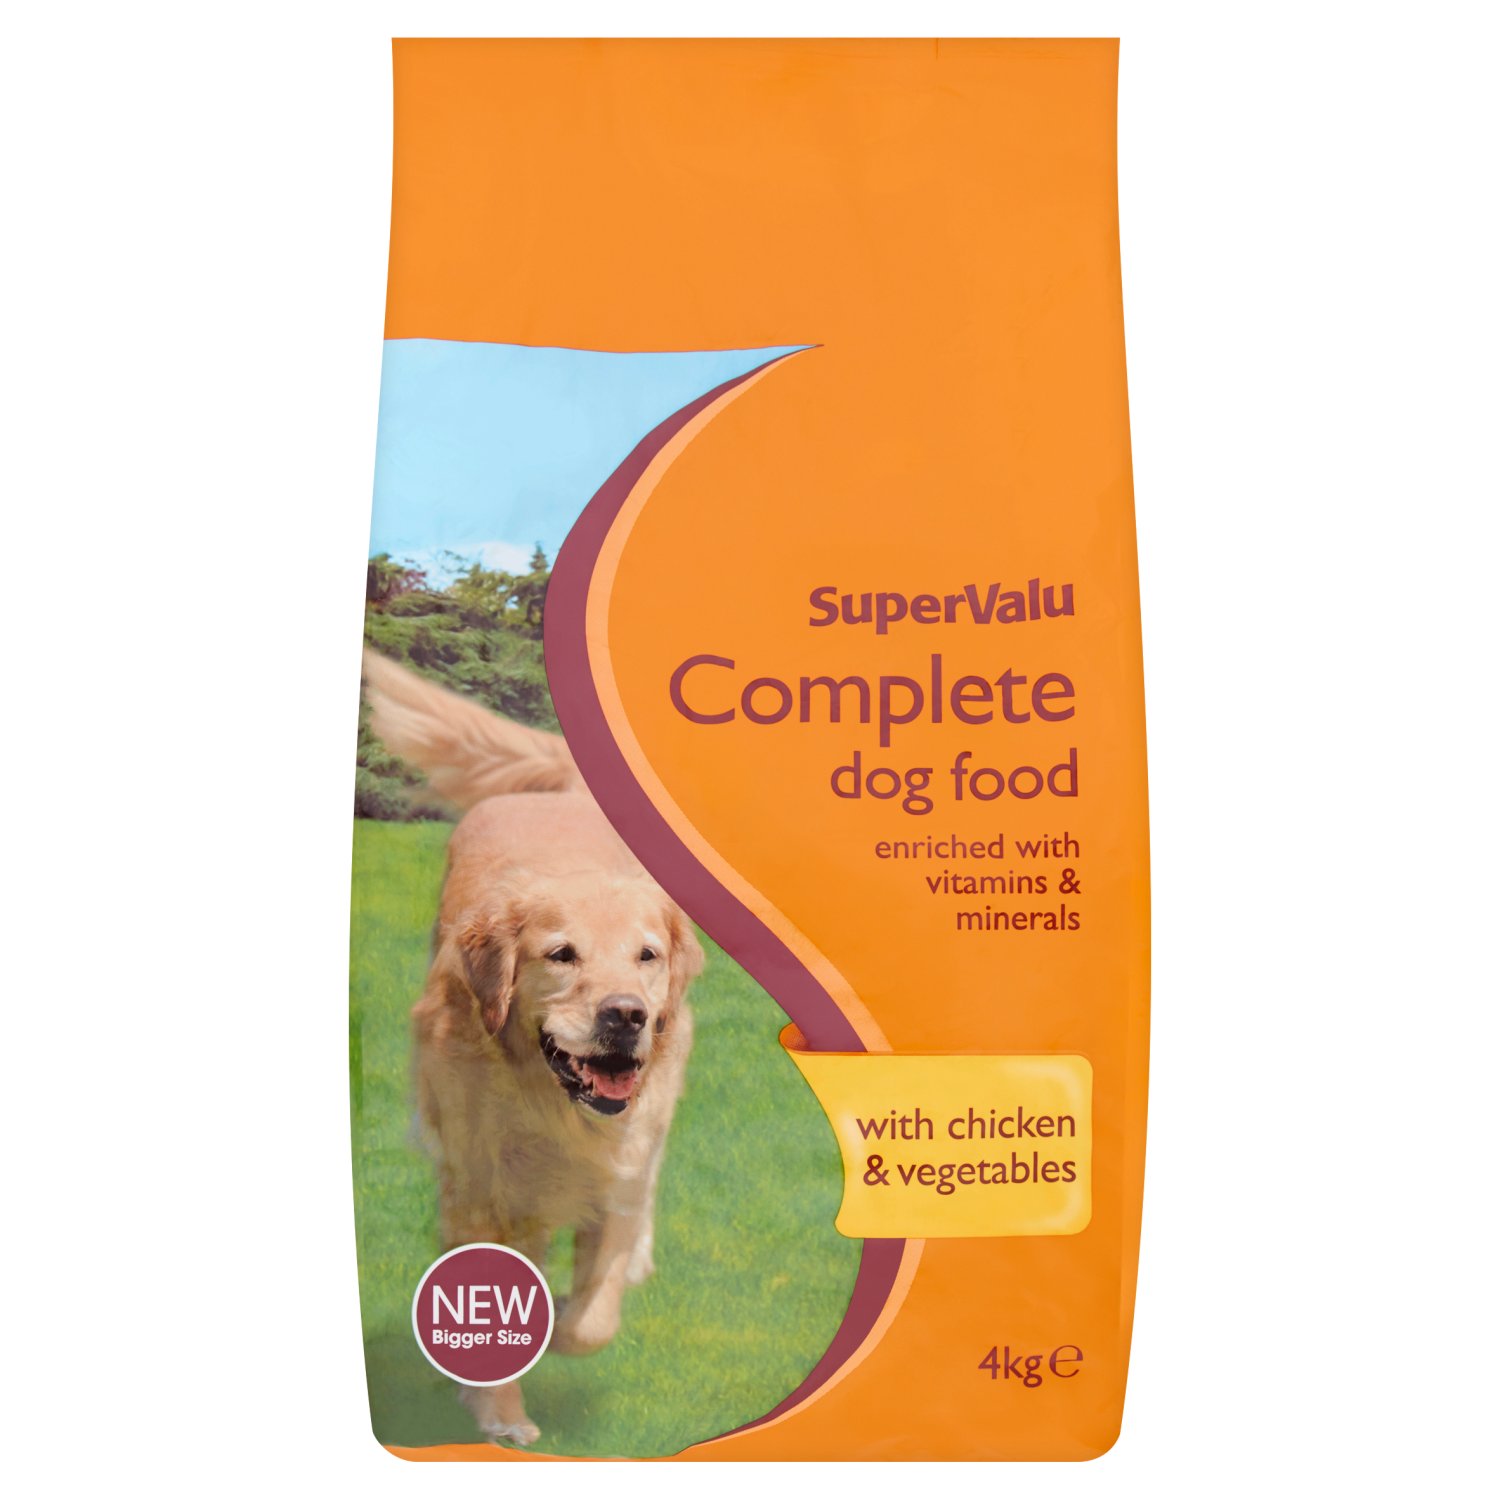 For Healthy Teeth - abrasive texture of kibbles helps control the build up of tartar.
Contains calcium, to help maintain healthy teeth & bones.
Contains fibre for intestinal health.
With natural linoleic acid and added zinc for a healthy skin & coat.